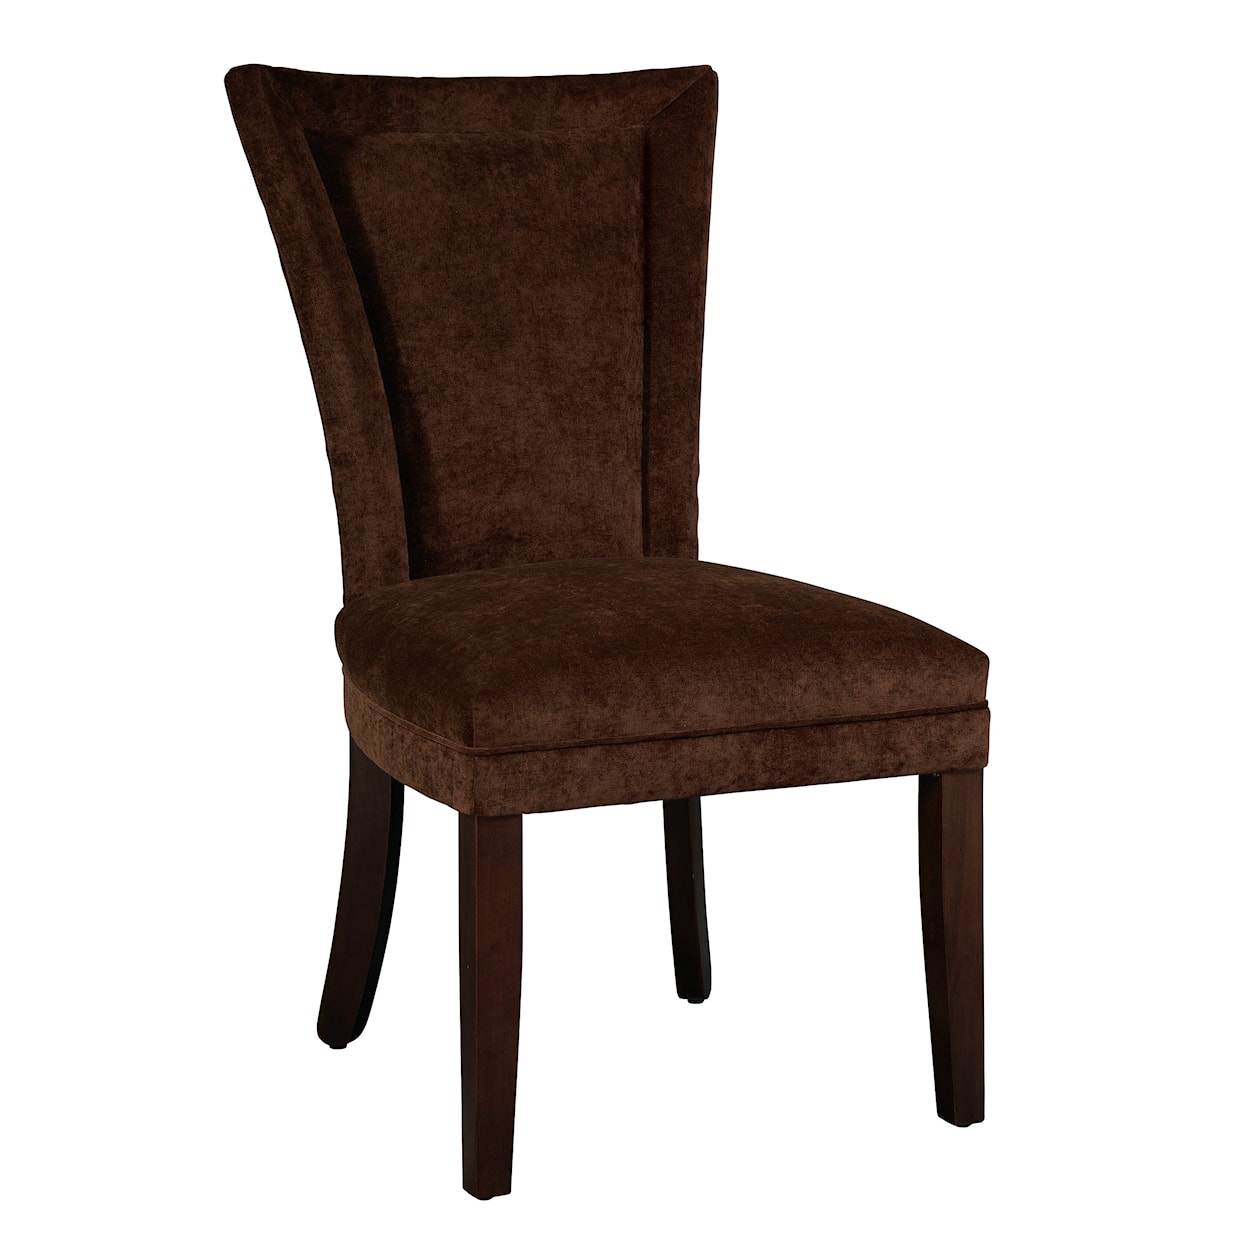 Hekman Upholstery Jeanette Dining Chair